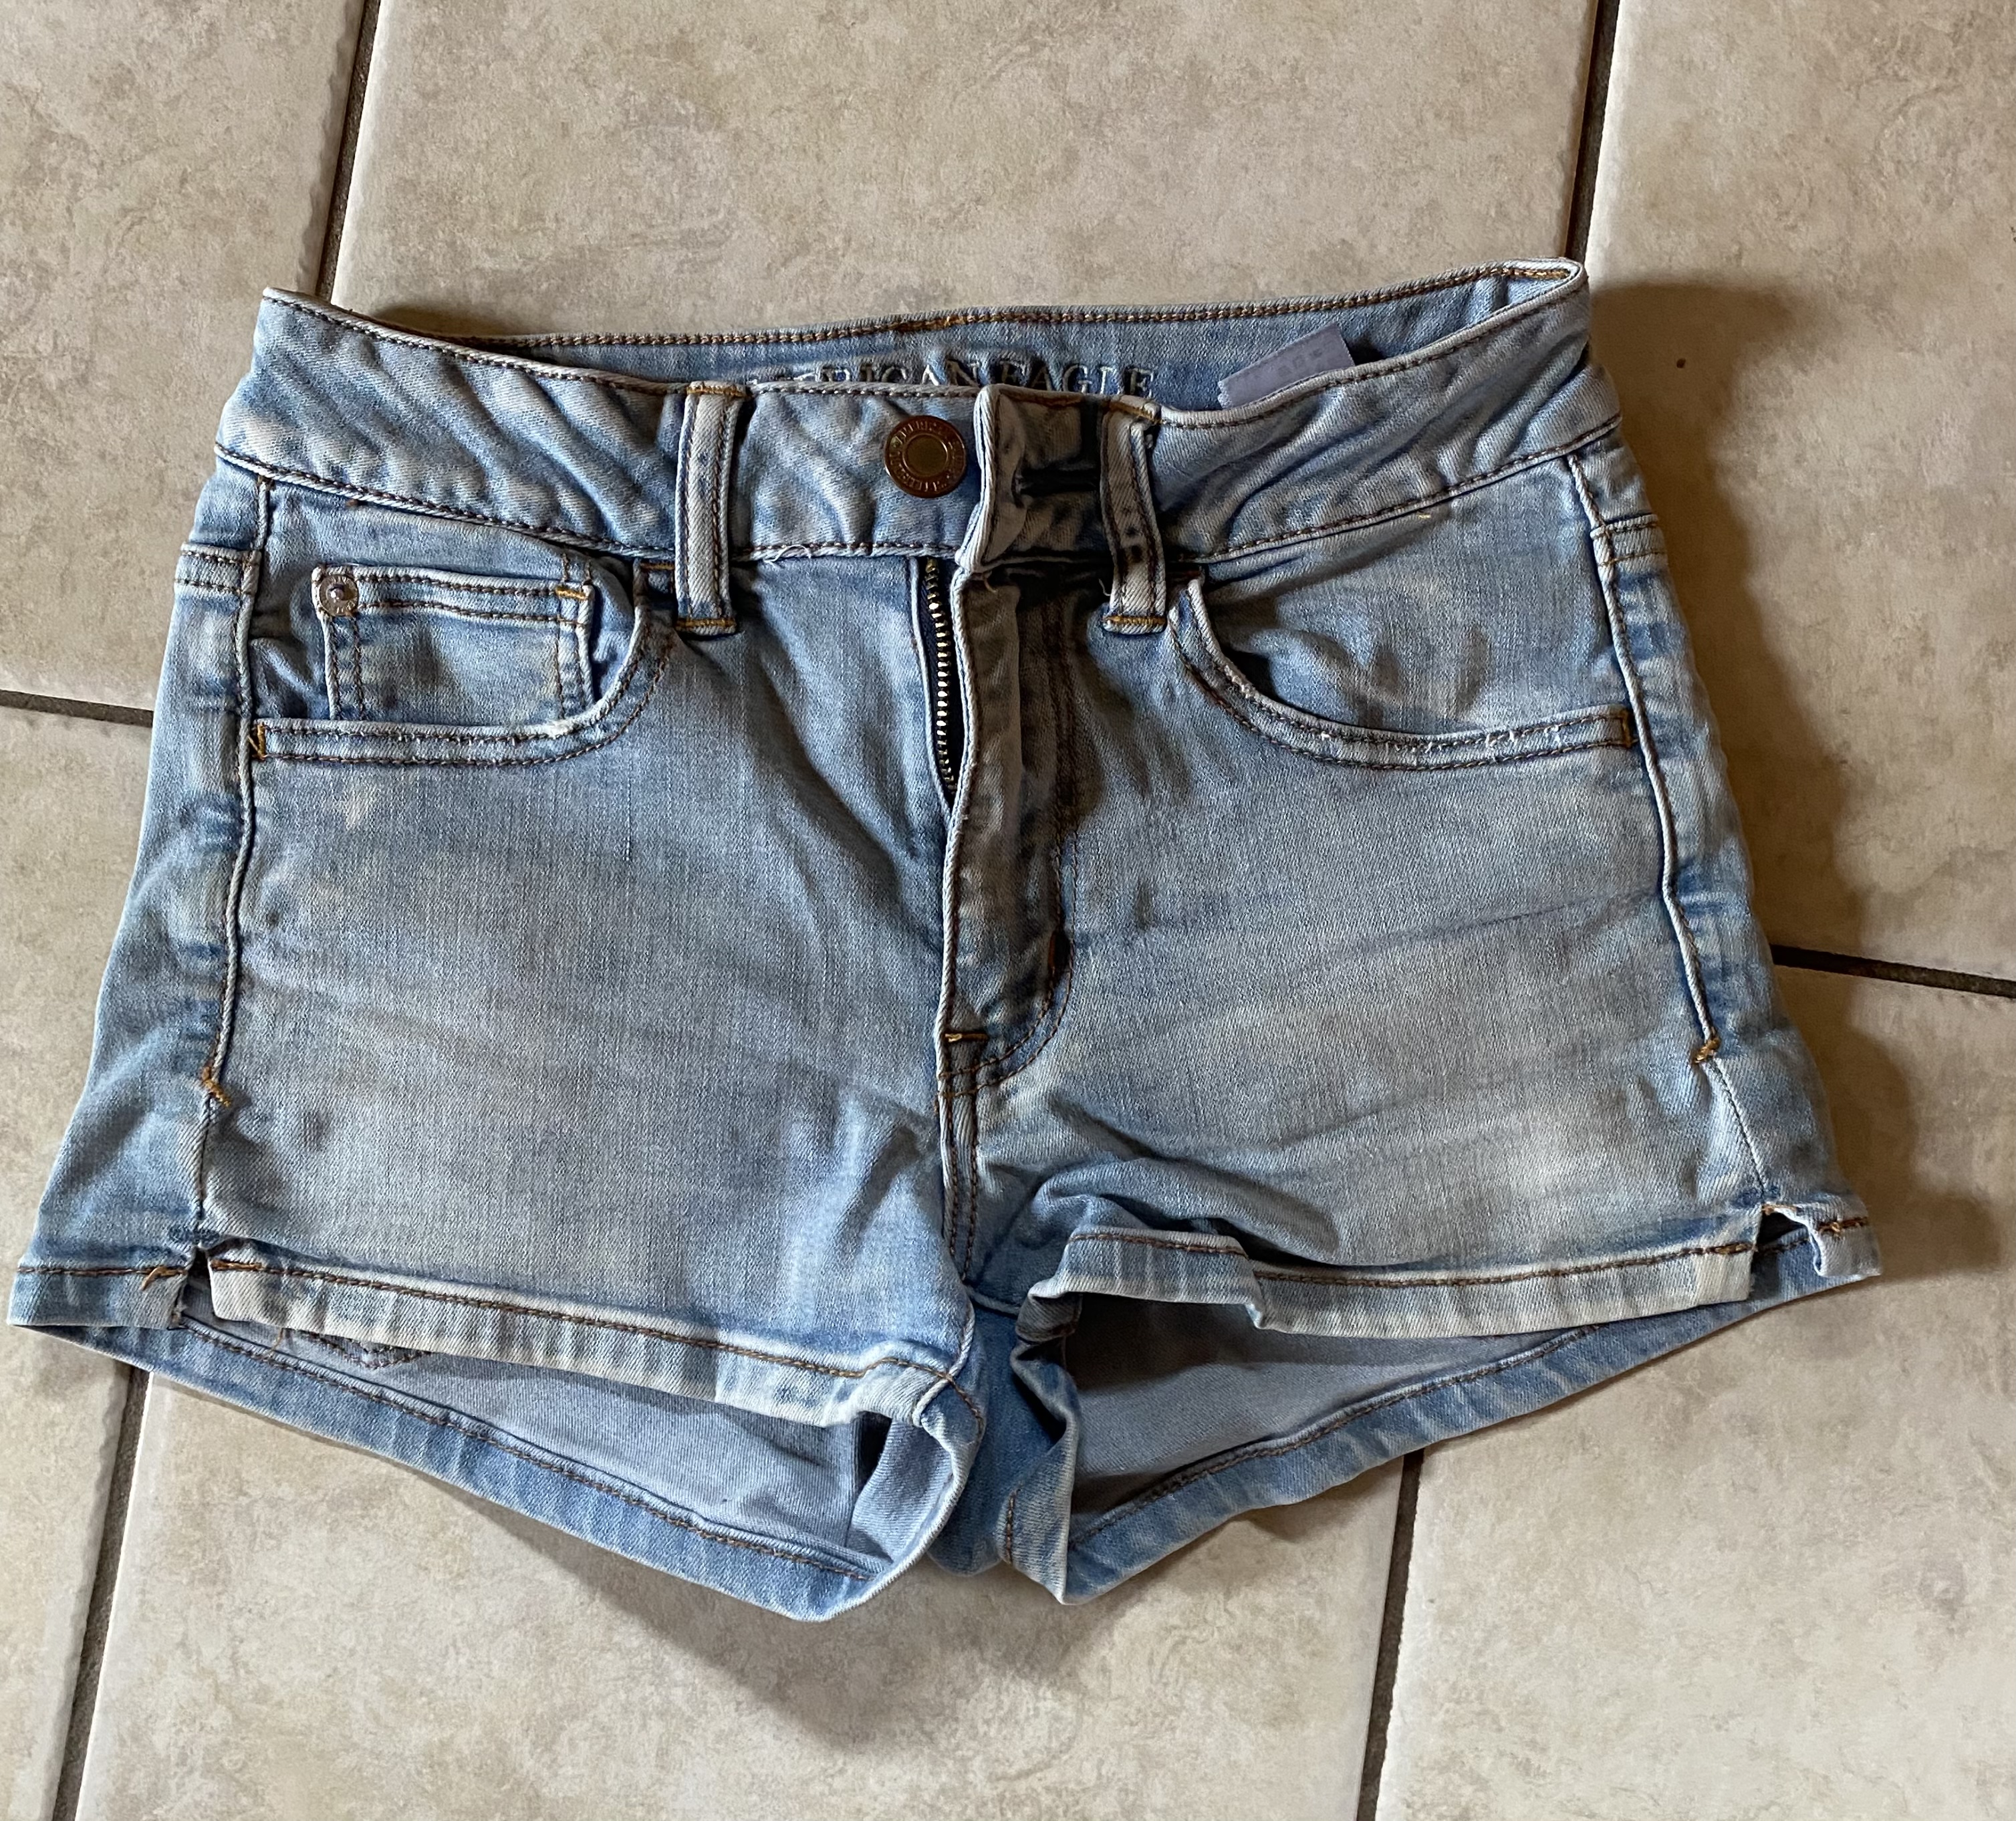 Jeans Shorts - Size 2